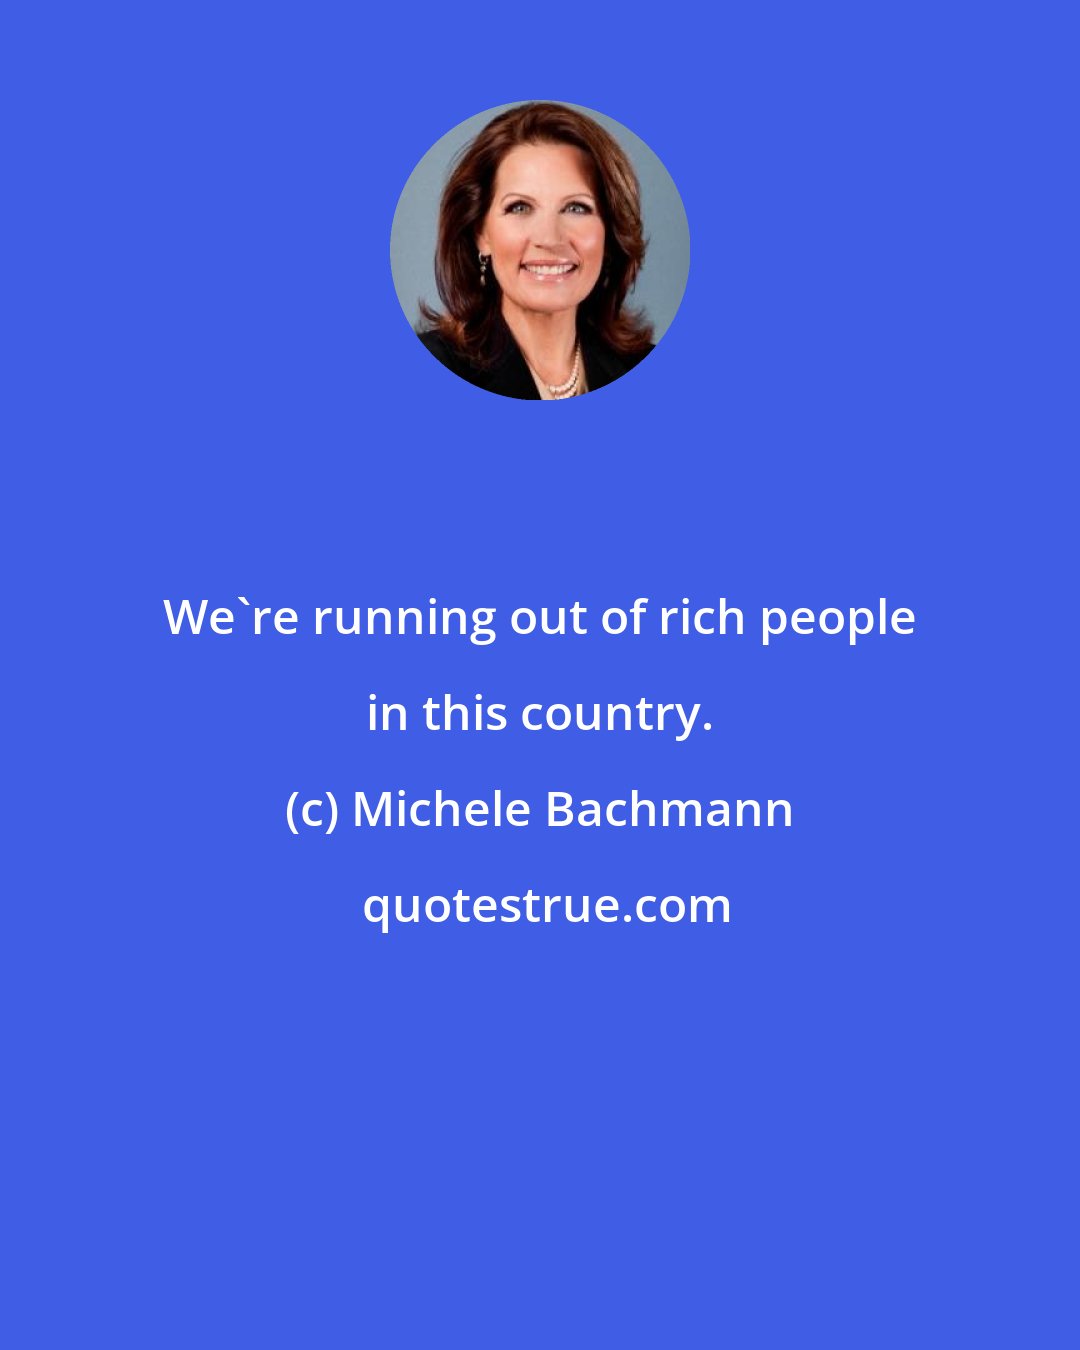 Michele Bachmann: We're running out of rich people in this country.